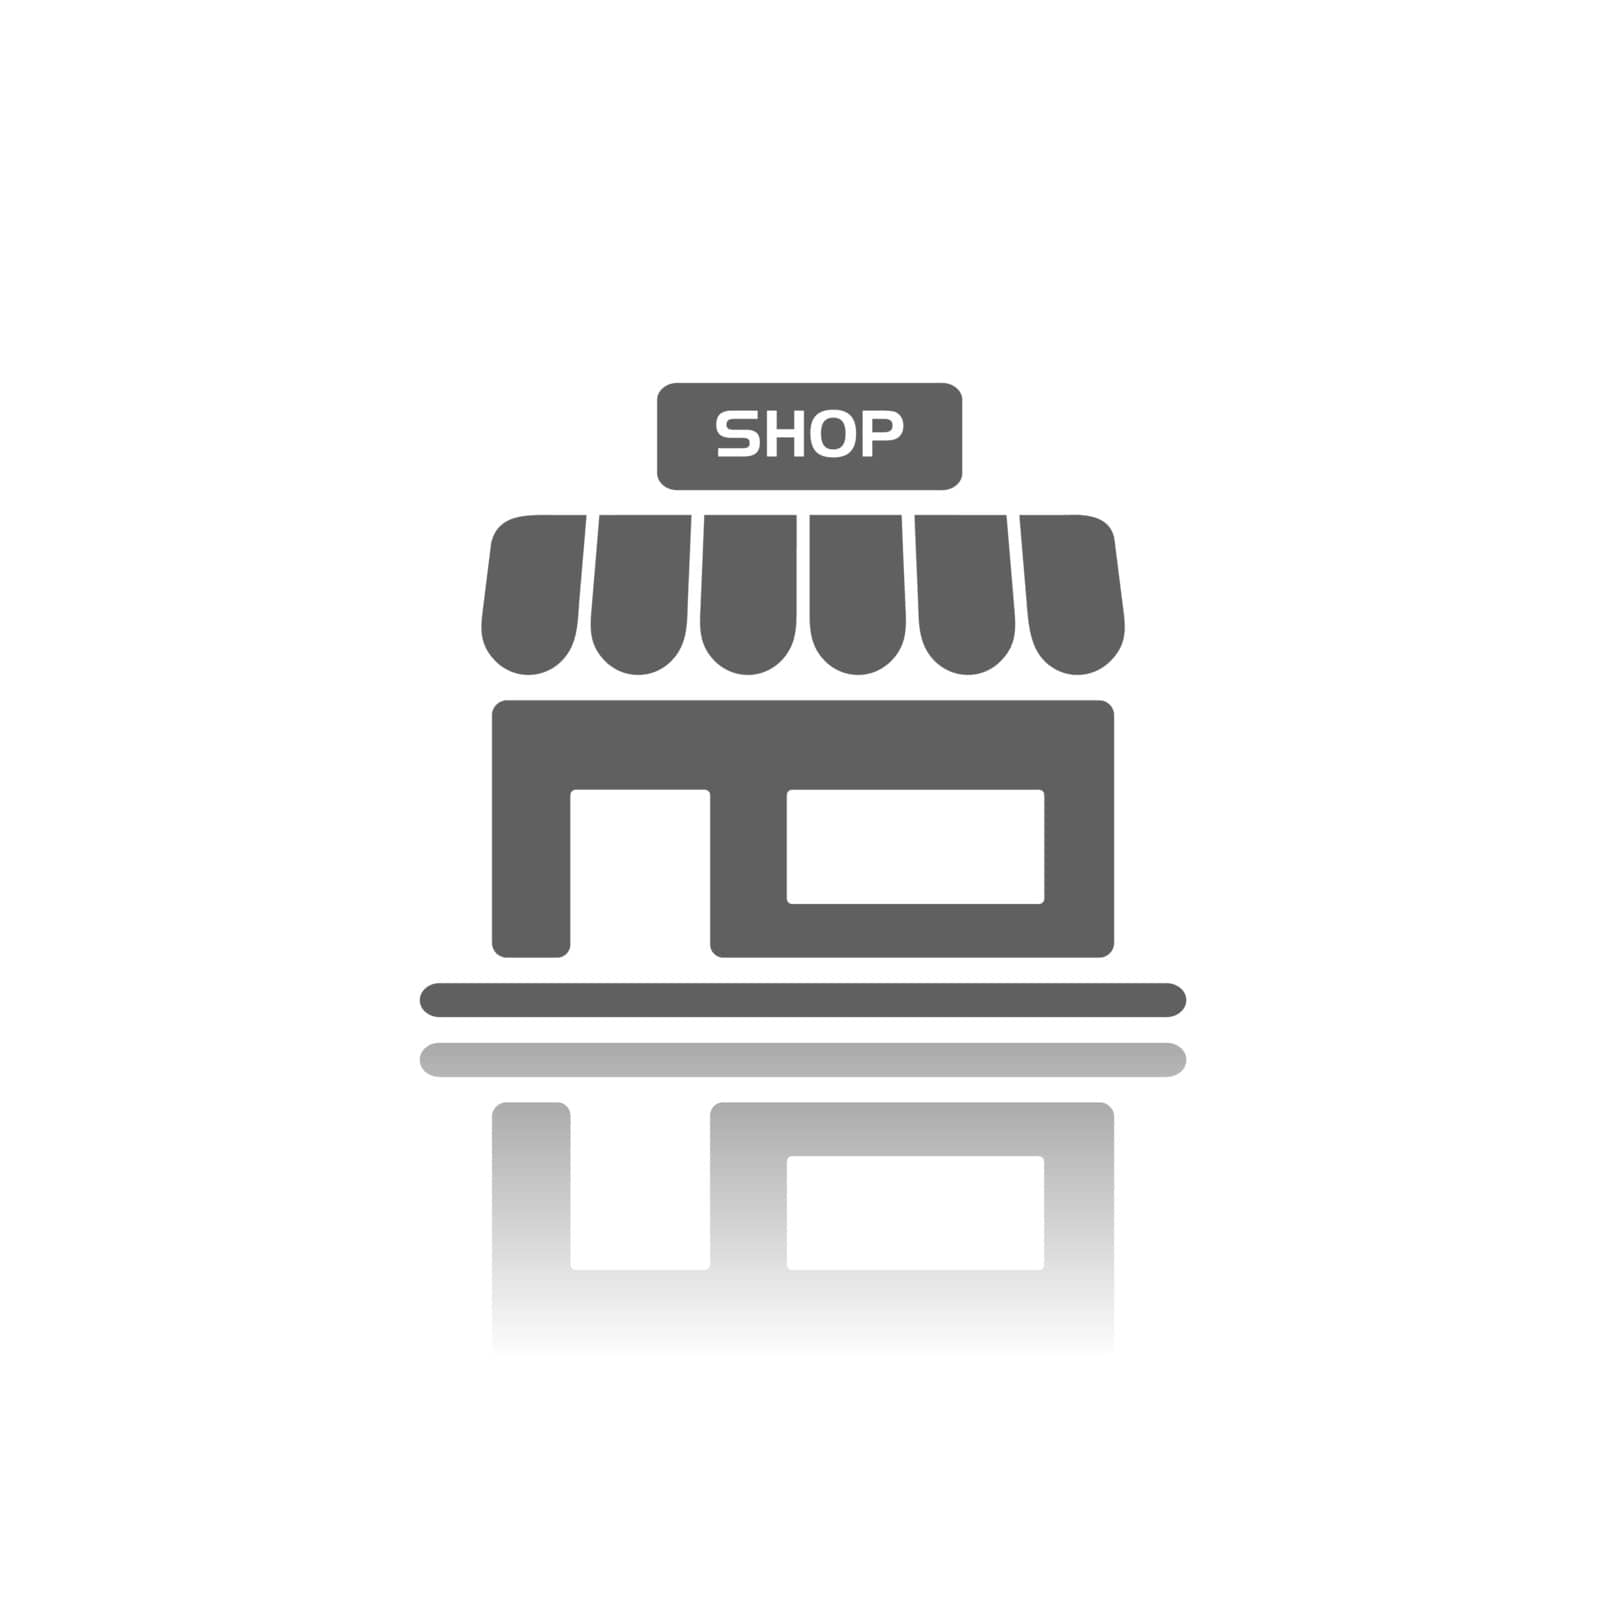 Shop icon with reflection on a white background by Imaagio